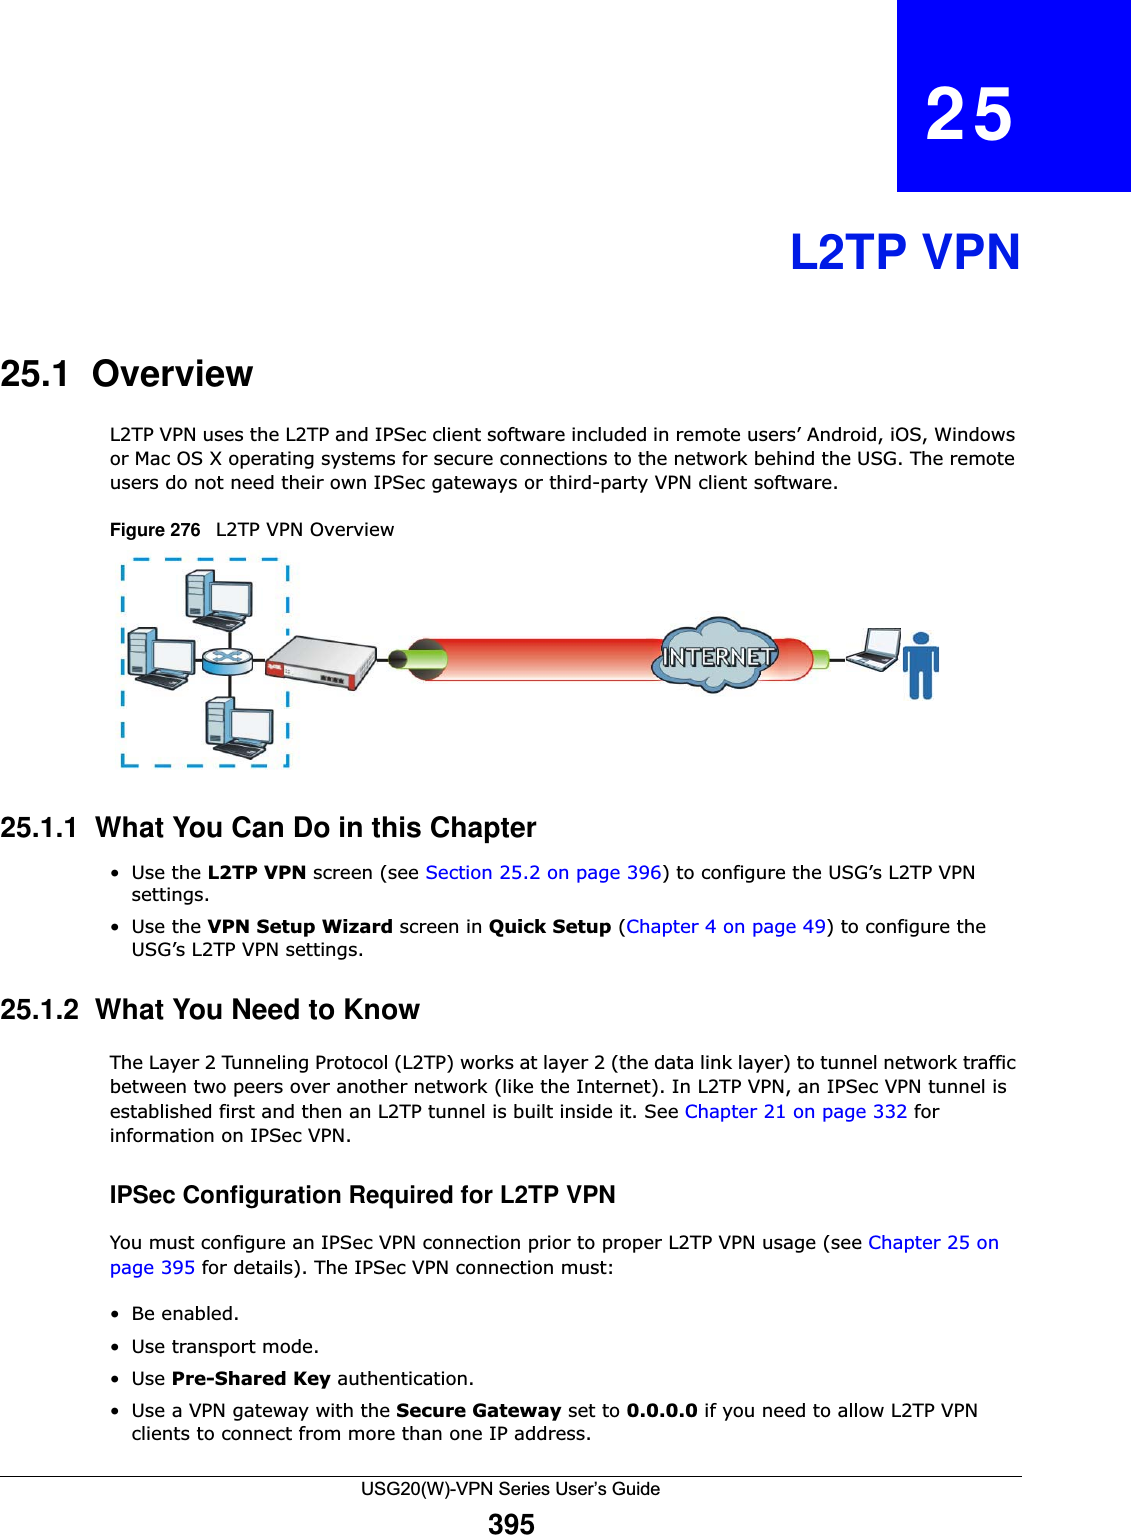 USG20(W)-VPN Series User’s Guide395CHAPTER   25L2TP VPN25.1  OverviewL2TP VPN uses the L2TP and IPSec client software included in remote users’ Android, iOS, Windows or Mac OS X operating systems for secure connections to the network behind the USG. The remote users do not need their own IPSec gateways or third-party VPN client software. Figure 276   L2TP VPN Overview25.1.1  What You Can Do in this Chapter•Use the L2TP VPN screen (see Section 25.2 on page 396) to configure the USG’s L2TP VPN settings. •Use the VPN Setup Wizard screen in Quick Setup (Chapter 4 on page 49) to configure the USG’s L2TP VPN settings.25.1.2  What You Need to KnowThe Layer 2 Tunneling Protocol (L2TP) works at layer 2 (the data link layer) to tunnel network traffic between two peers over another network (like the Internet). In L2TP VPN, an IPSec VPN tunnel is established first and then an L2TP tunnel is built inside it. See Chapter 21 on page 332 for information on IPSec VPN.IPSec Configuration Required for L2TP VPNYou must configure an IPSec VPN connection prior to proper L2TP VPN usage (see Chapter 25 on page 395 for details). The IPSec VPN connection must:• Be enabled.• Use transport mode.•Use Pre-Shared Key authentication.• Use a VPN gateway with the Secure Gateway set to 0.0.0.0 if you need to allow L2TP VPN clients to connect from more than one IP address.